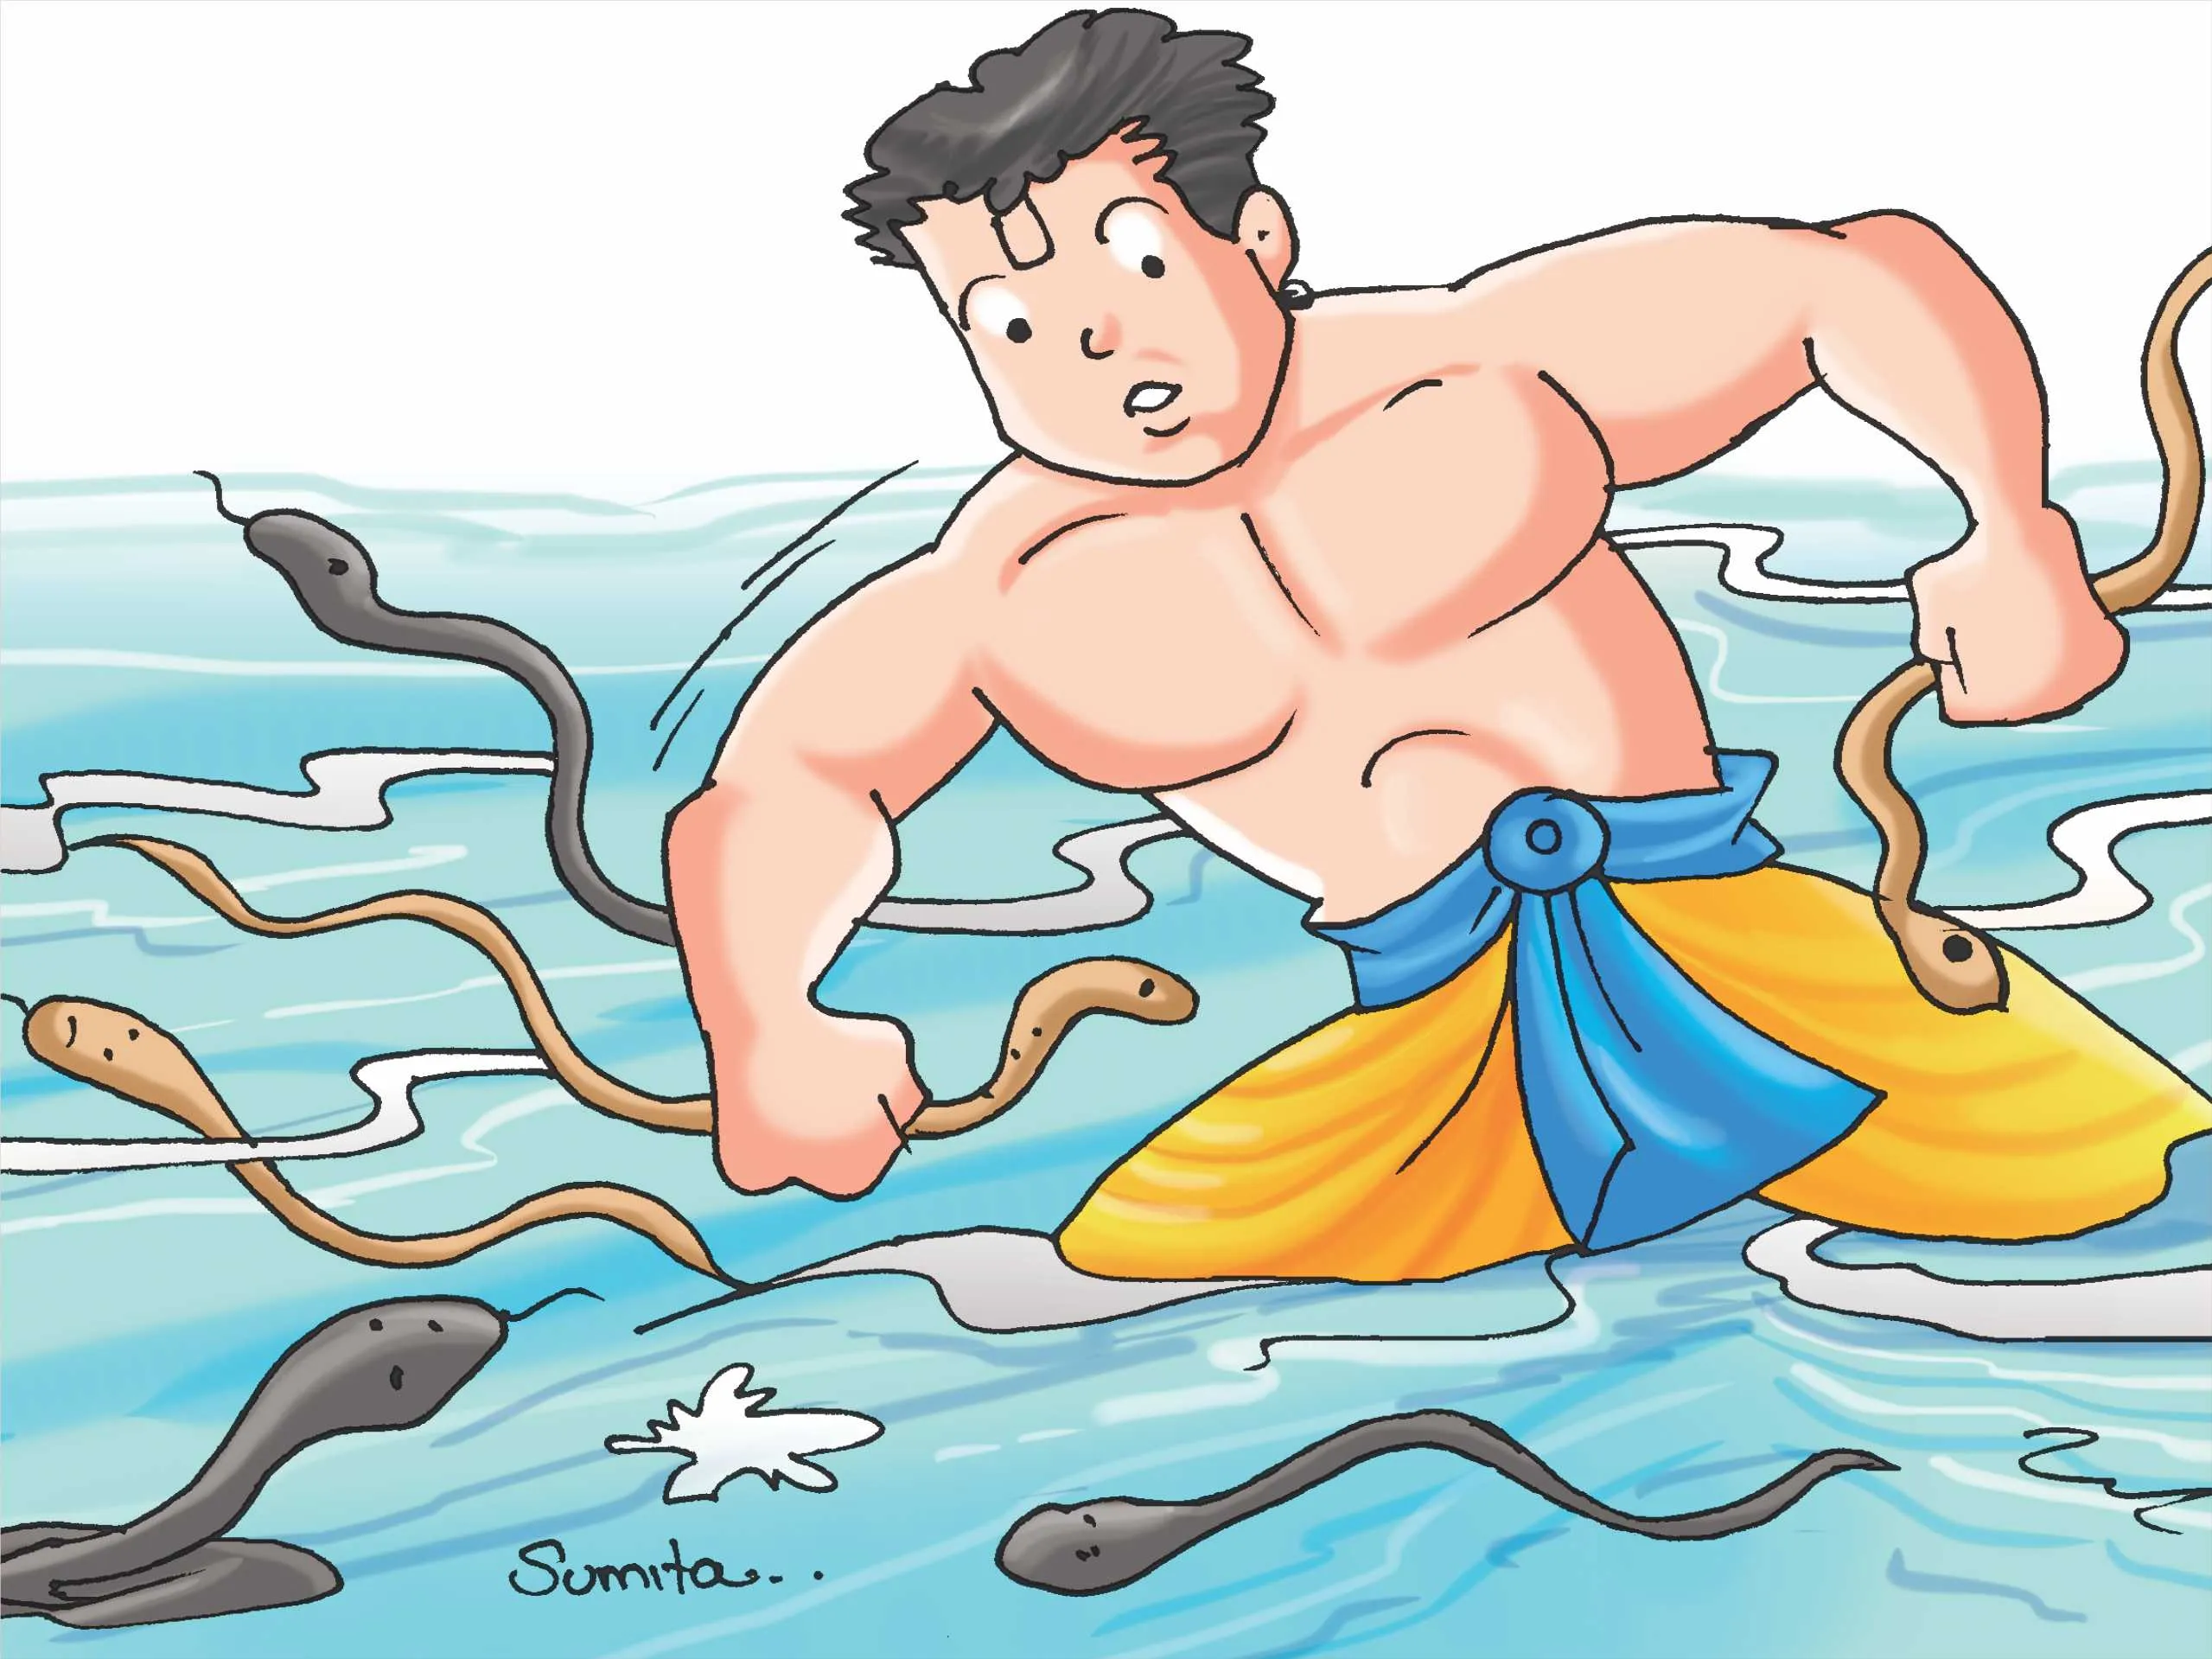 Bheem fighting with snakes in River Cartoon Image